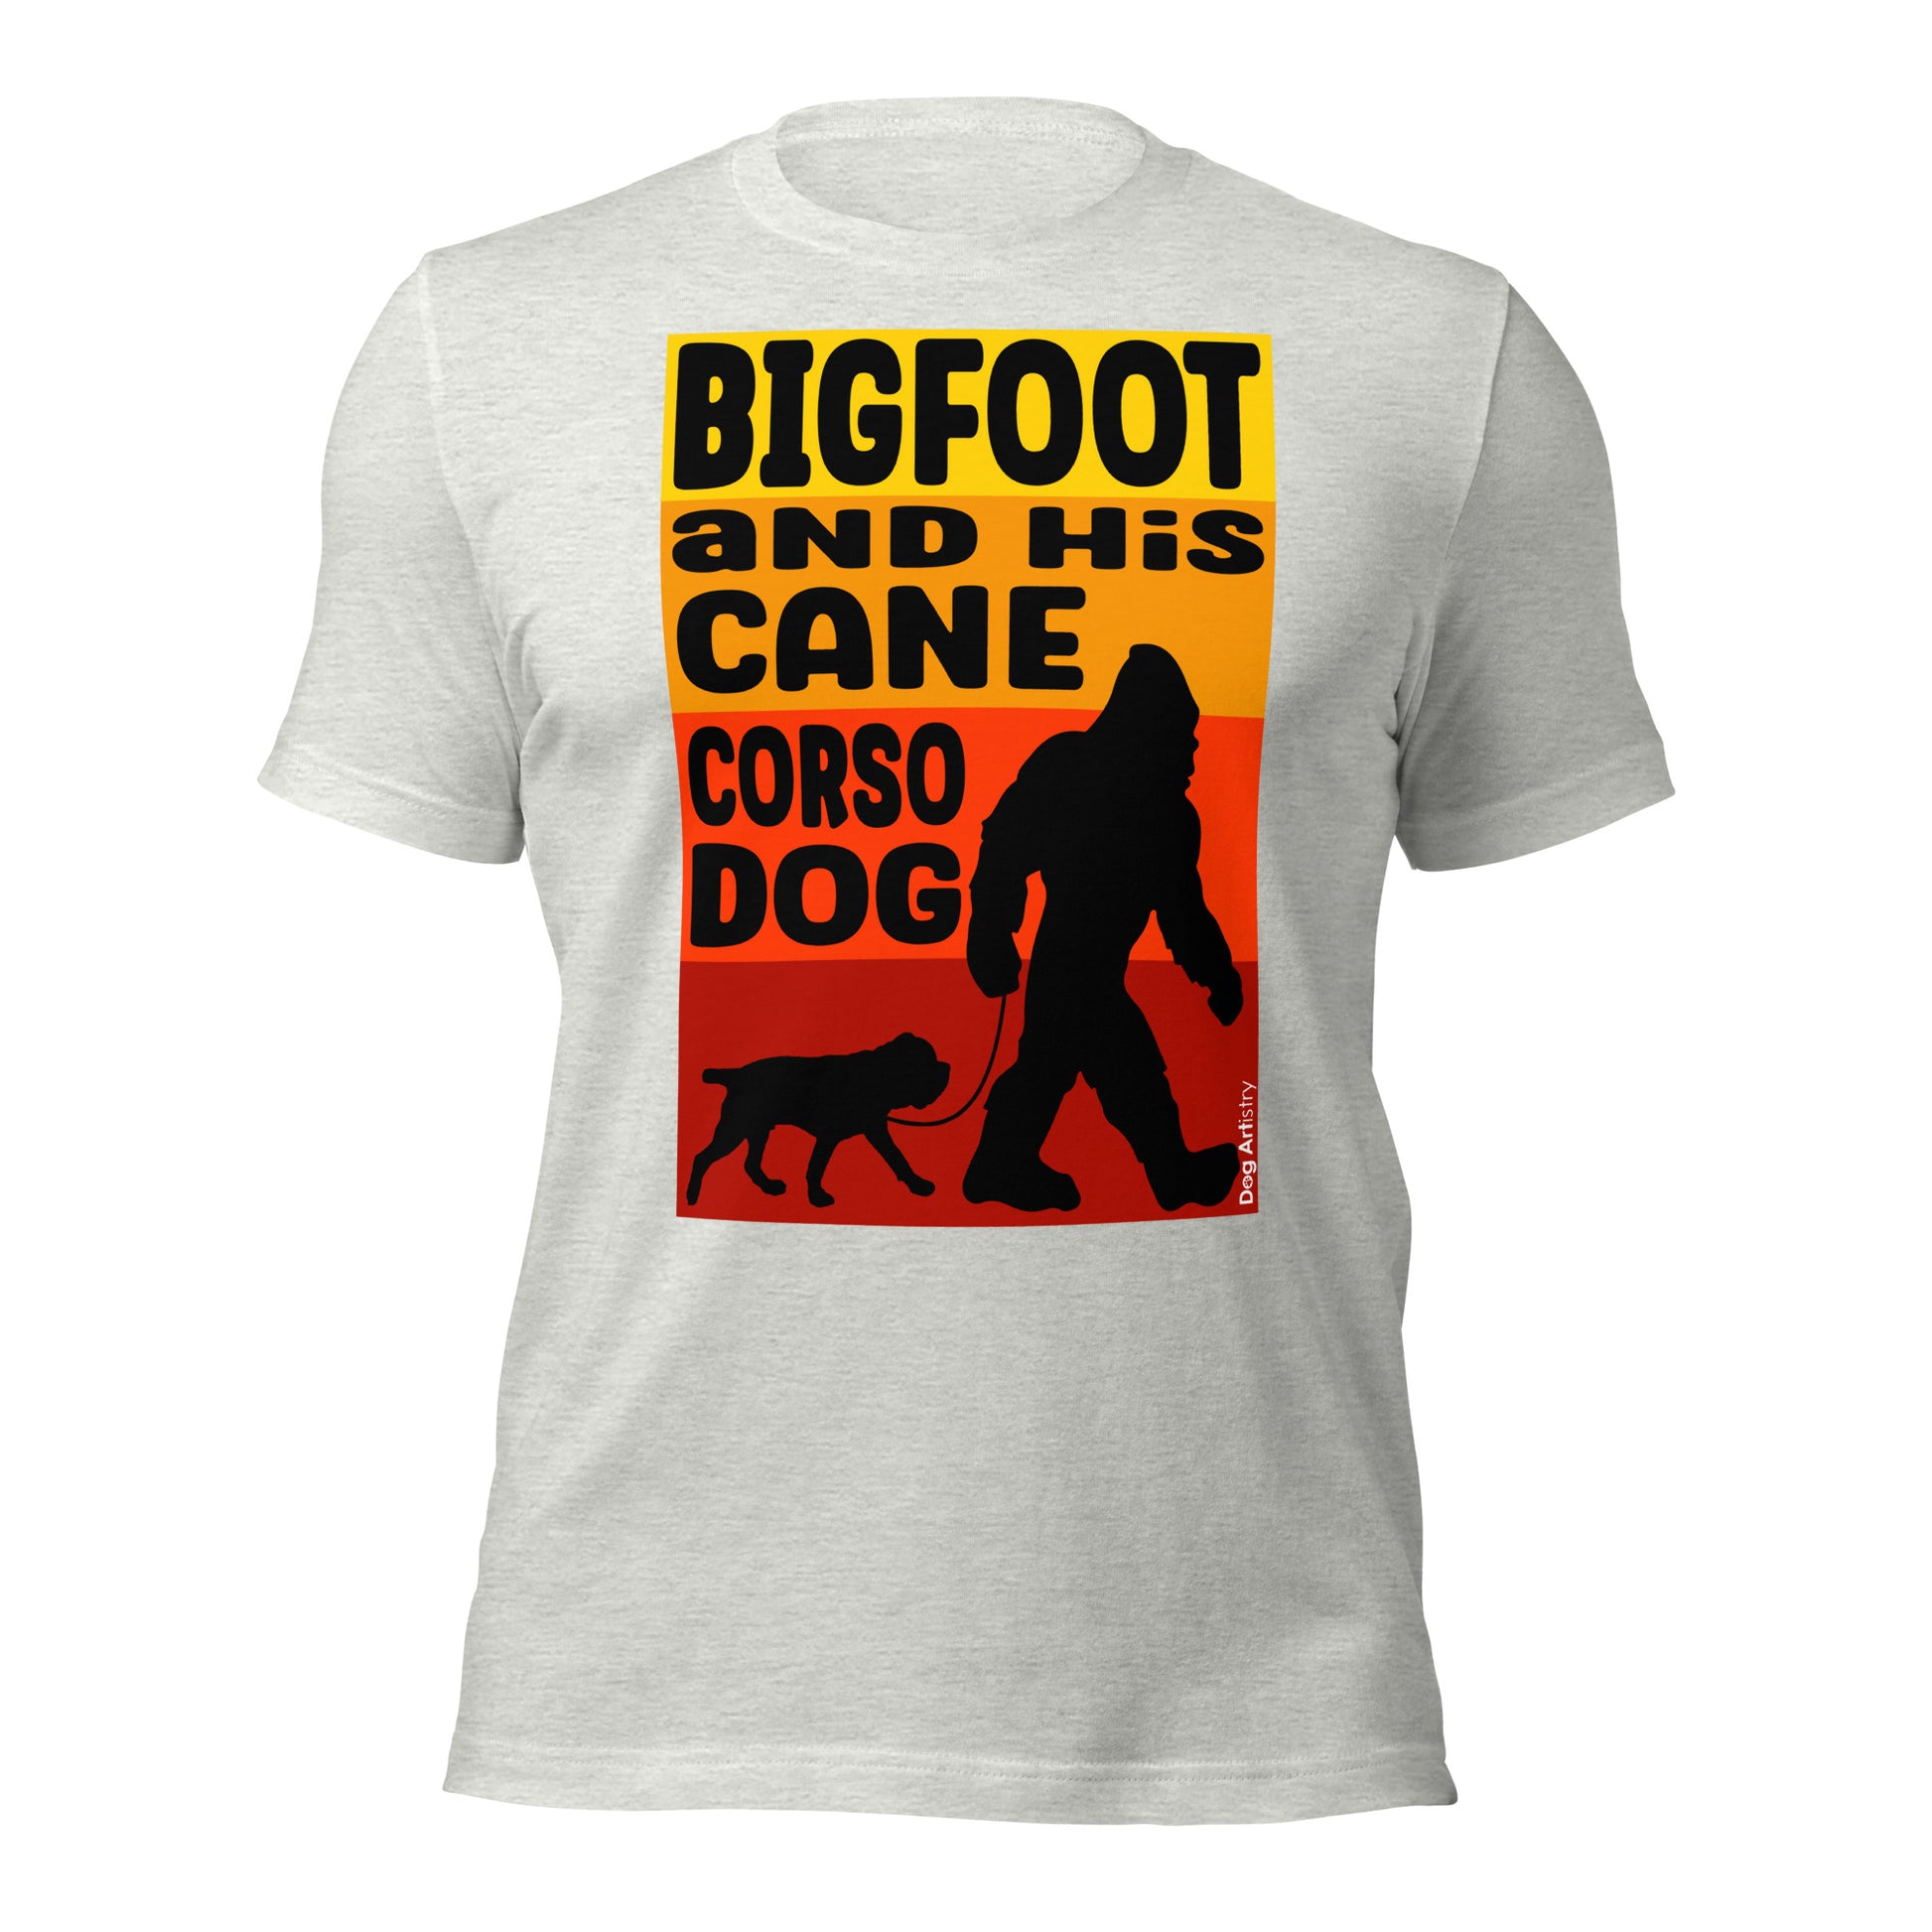 Big foot and his Cane Corso dog unisex ash t-shirt by Dog Artistry.